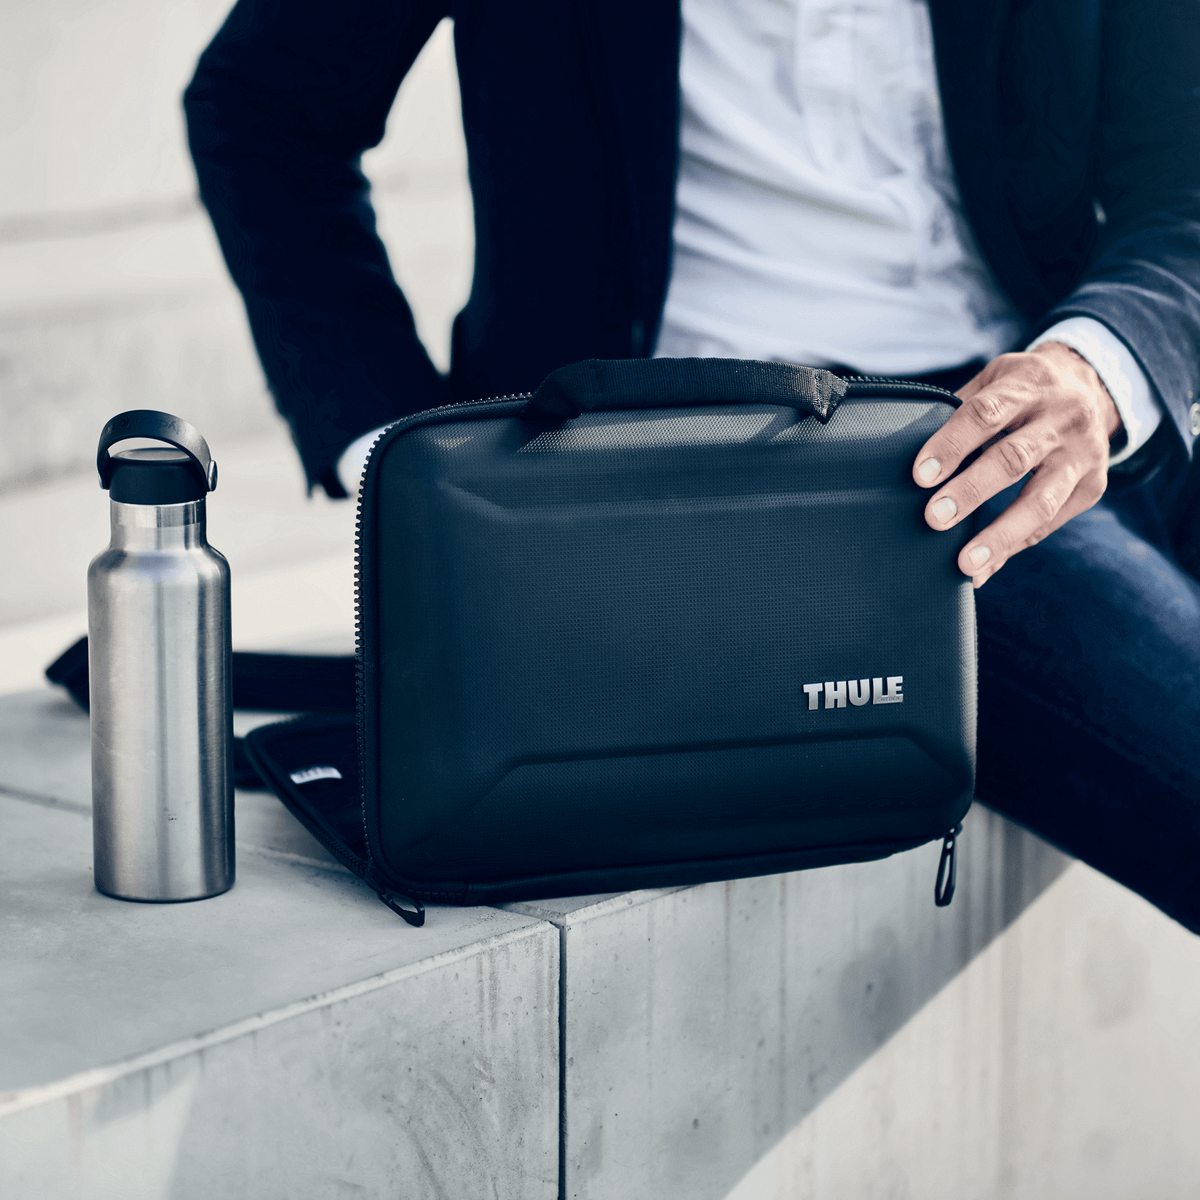 A person wearing professional clothing opens their black Thule Gauntlet 4 MacBook Pro Attaché next to a thermos.